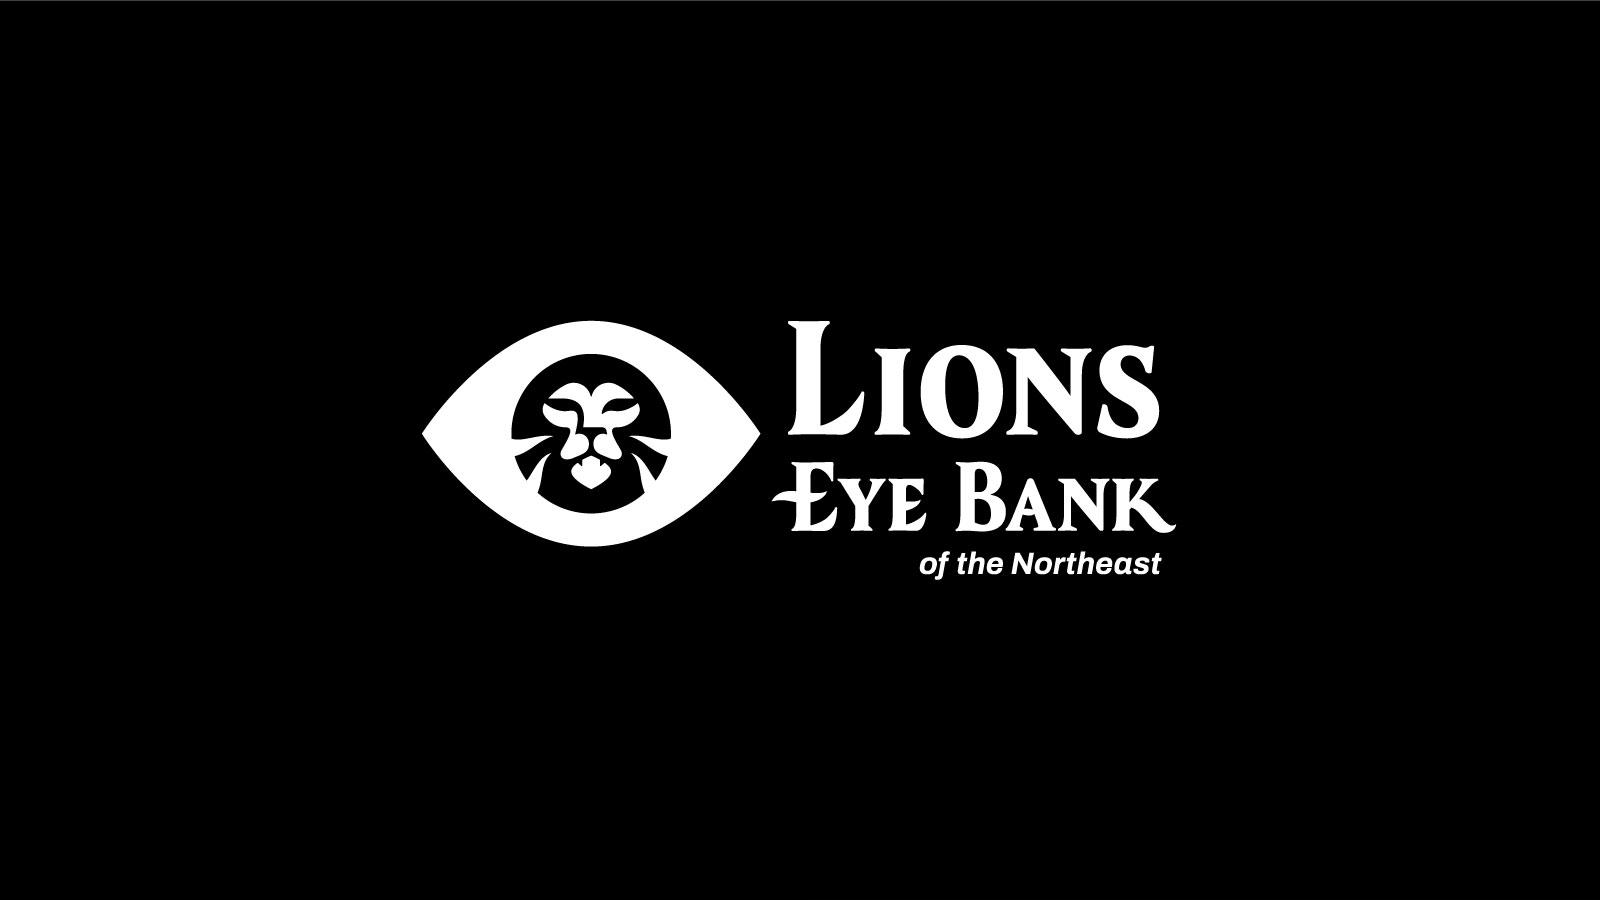 Lions Eye Bank of the Northeast | One color, white logo